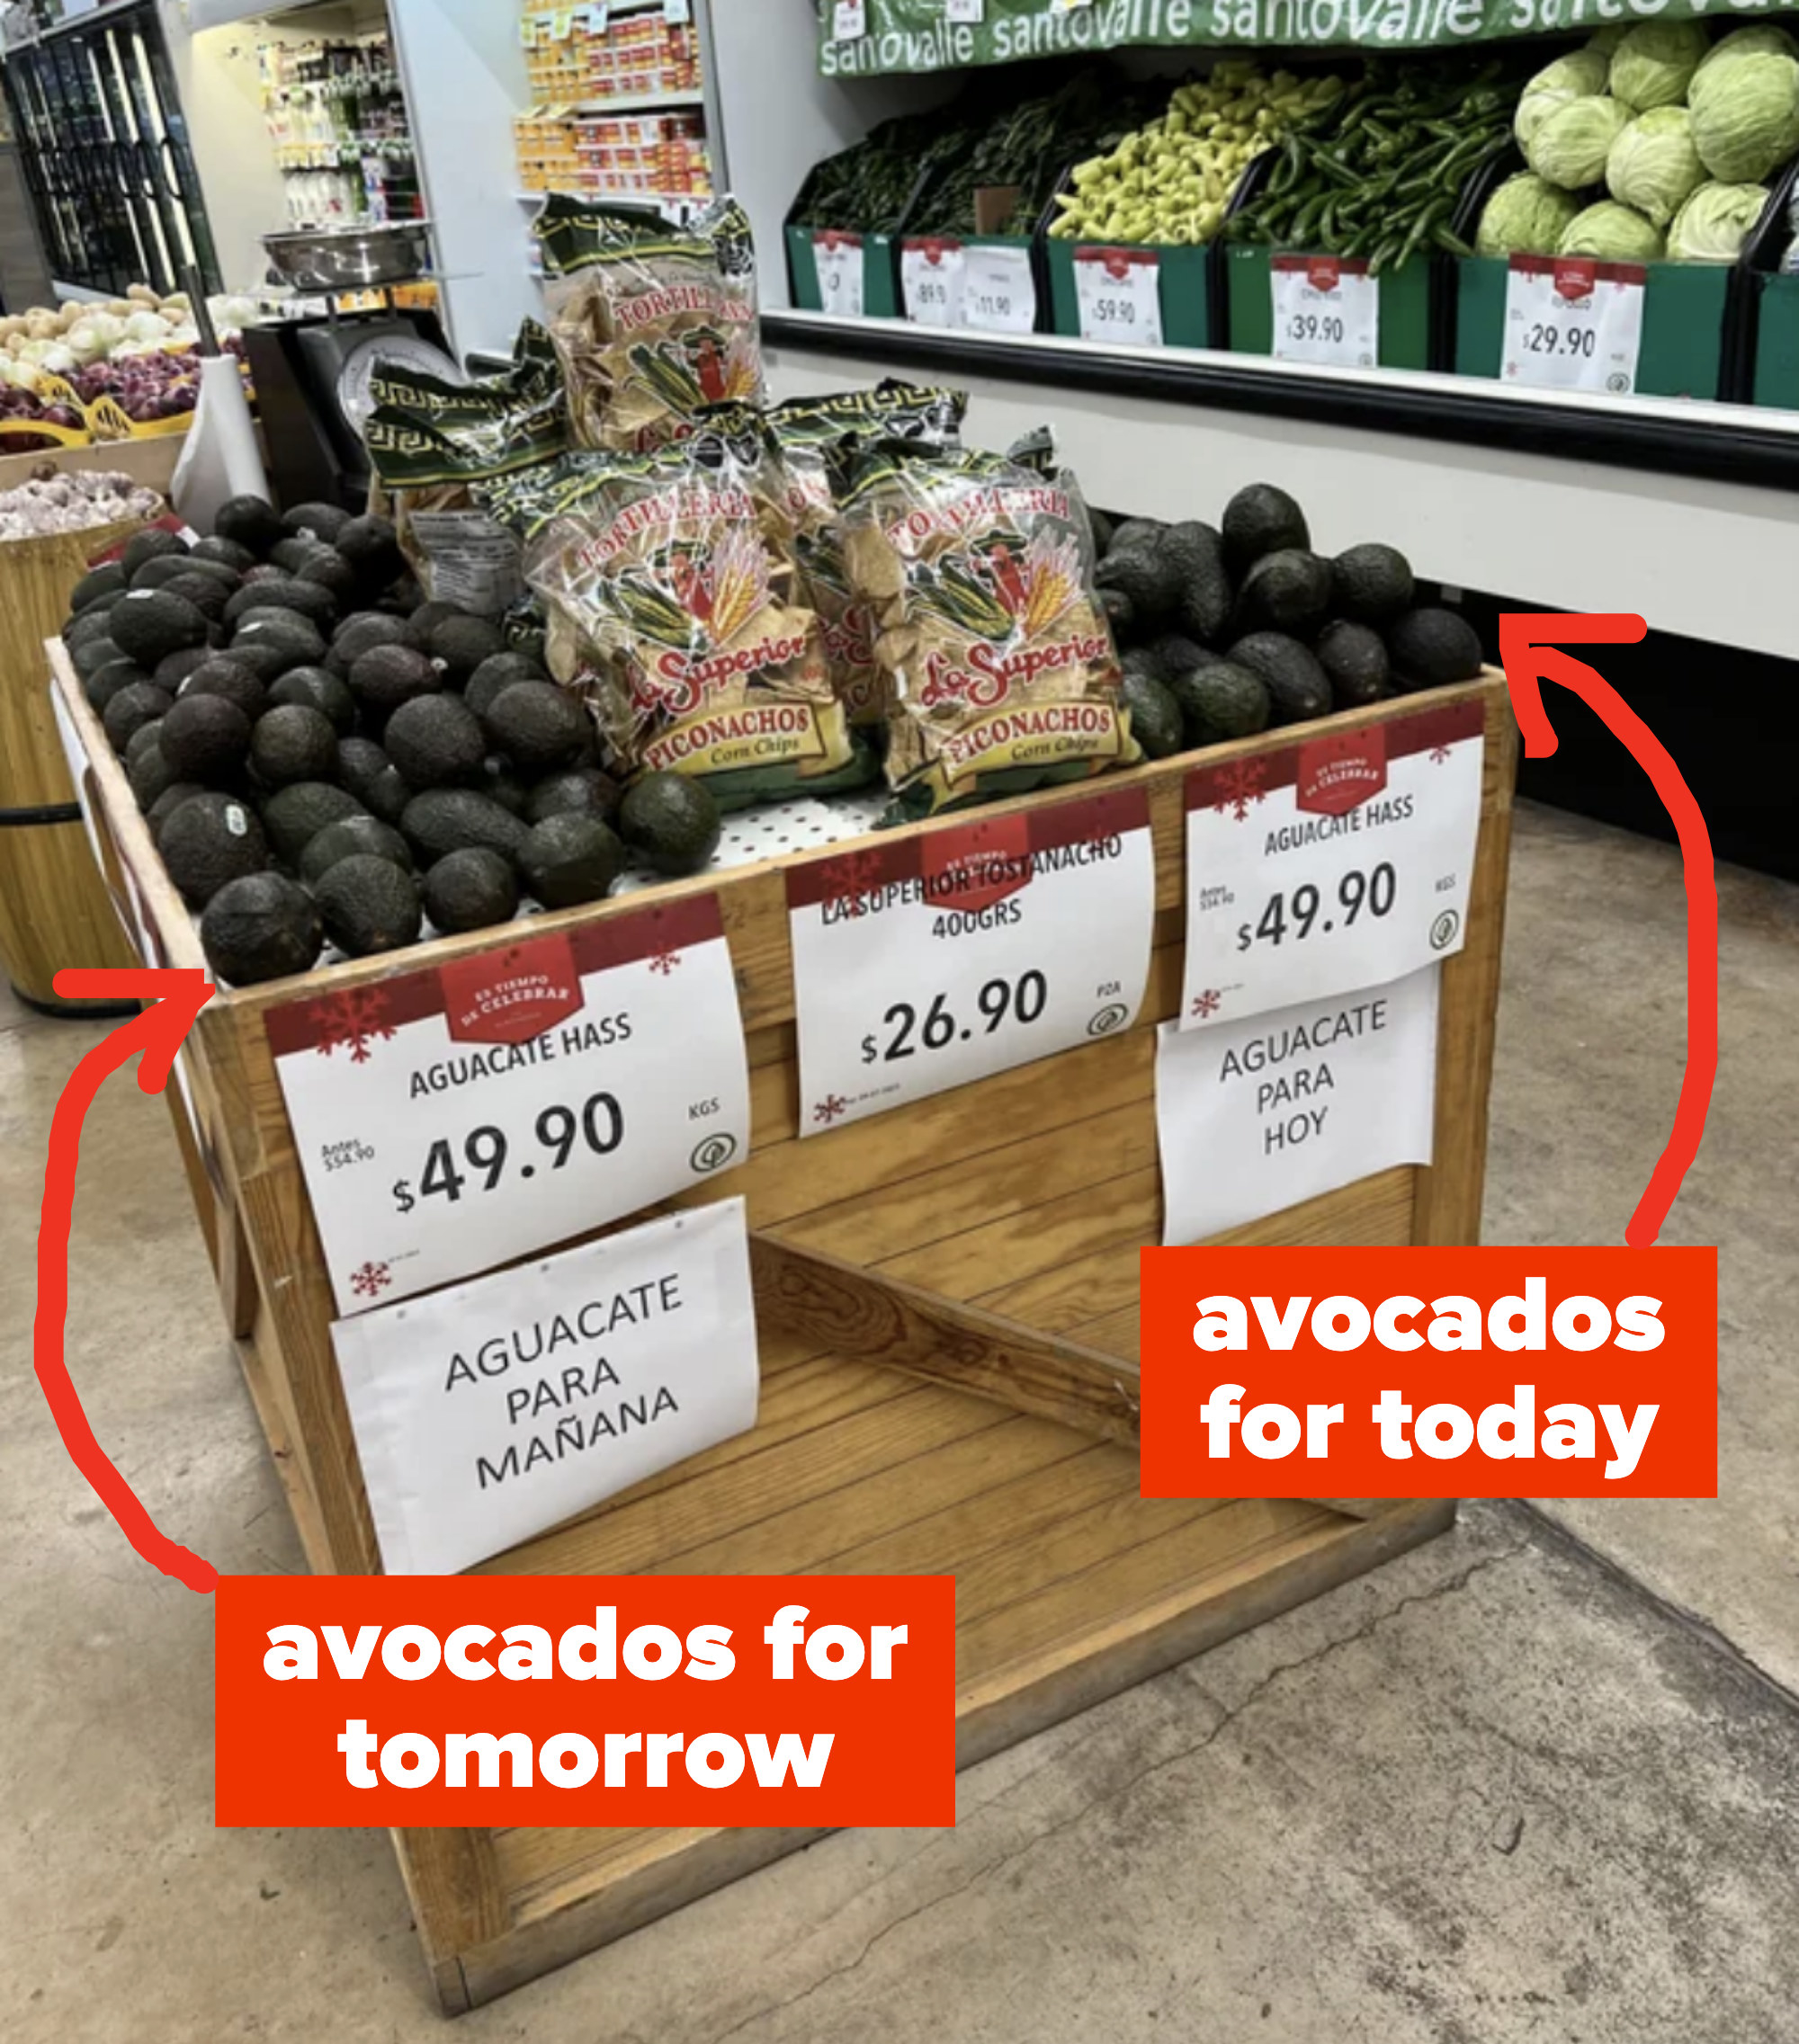 avocados for today or tomorrow